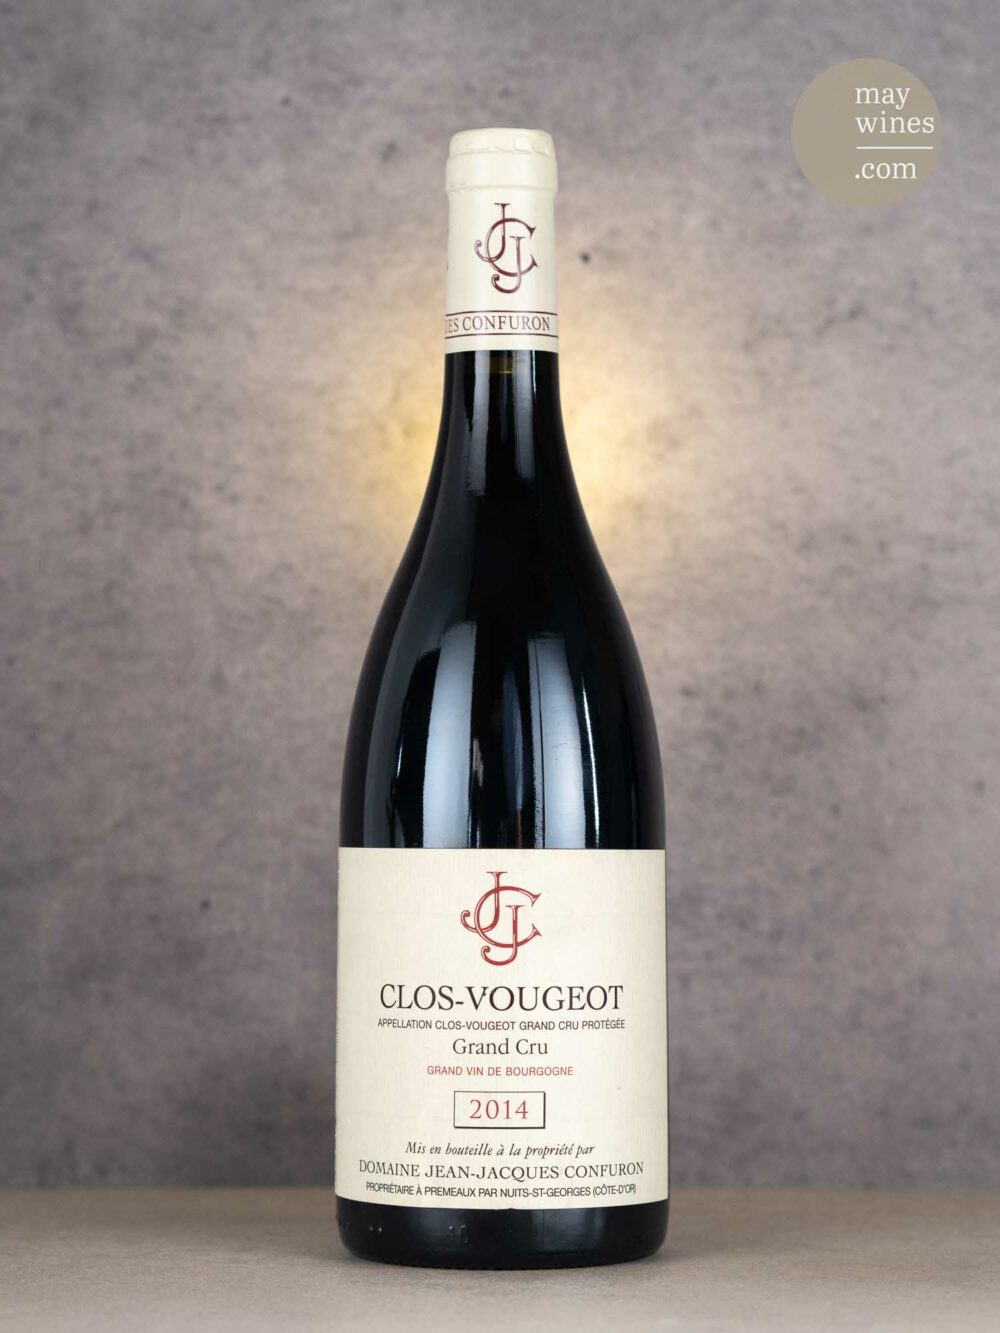 May Wines – Rotwein – 2014 Clos-Vougeot Grand Cru - Domaine Jean Jacques Confuron